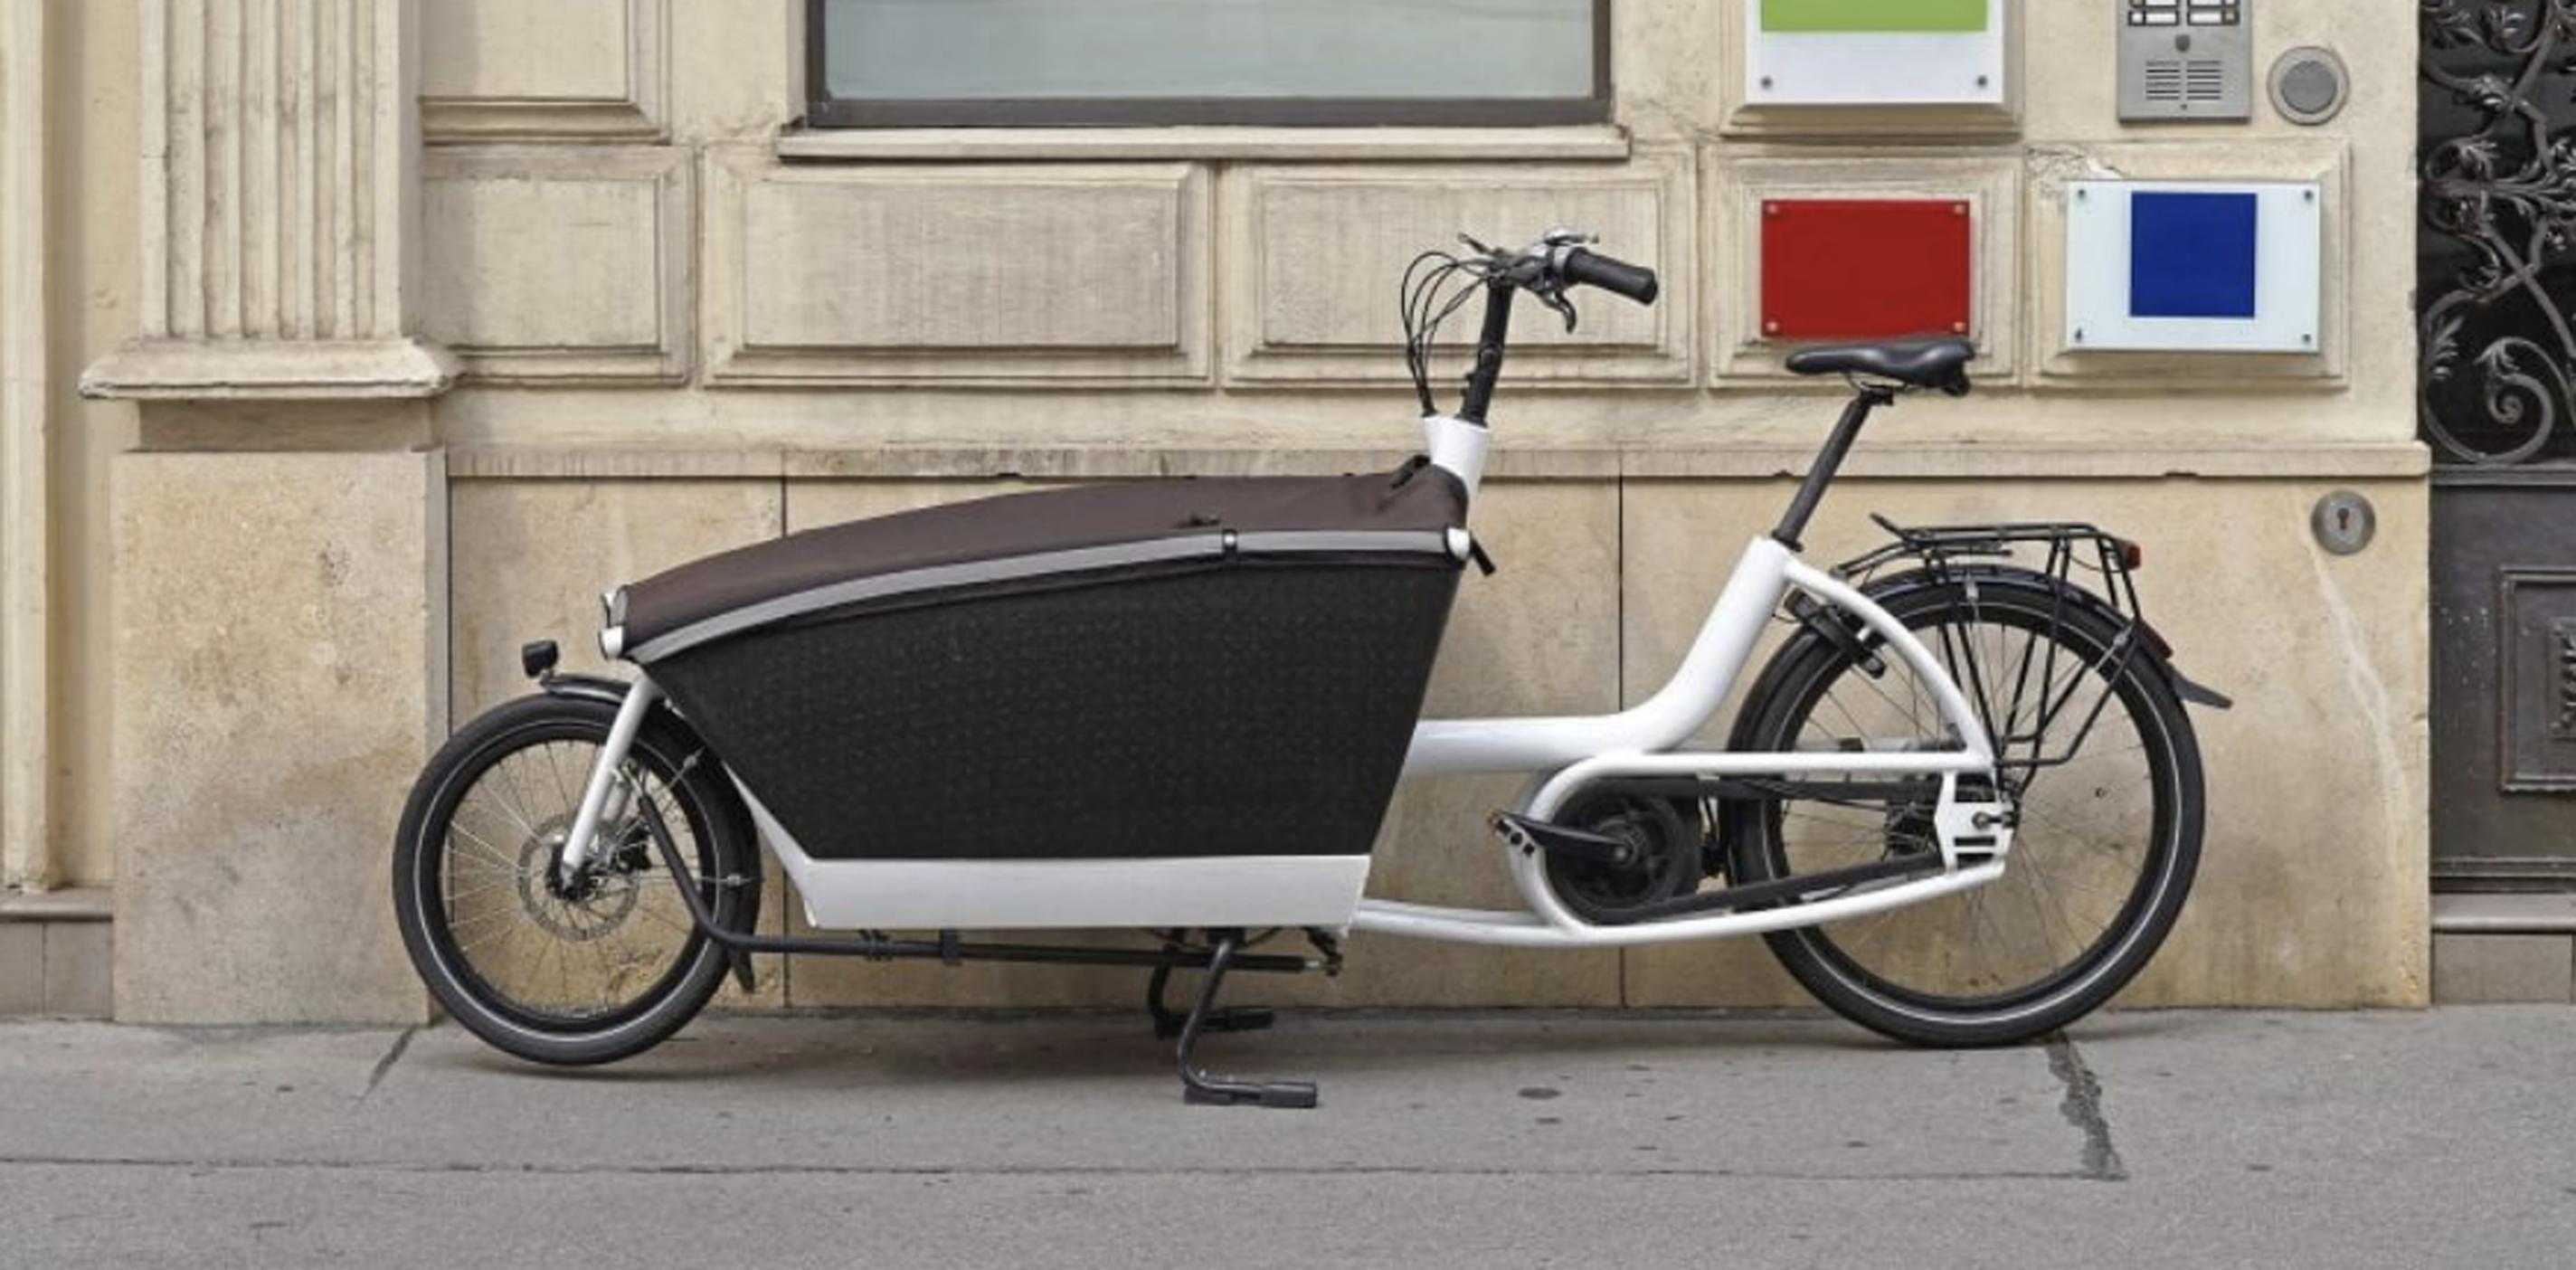 £1.2m funding awarded to 14 councils for e-cargo bike projects